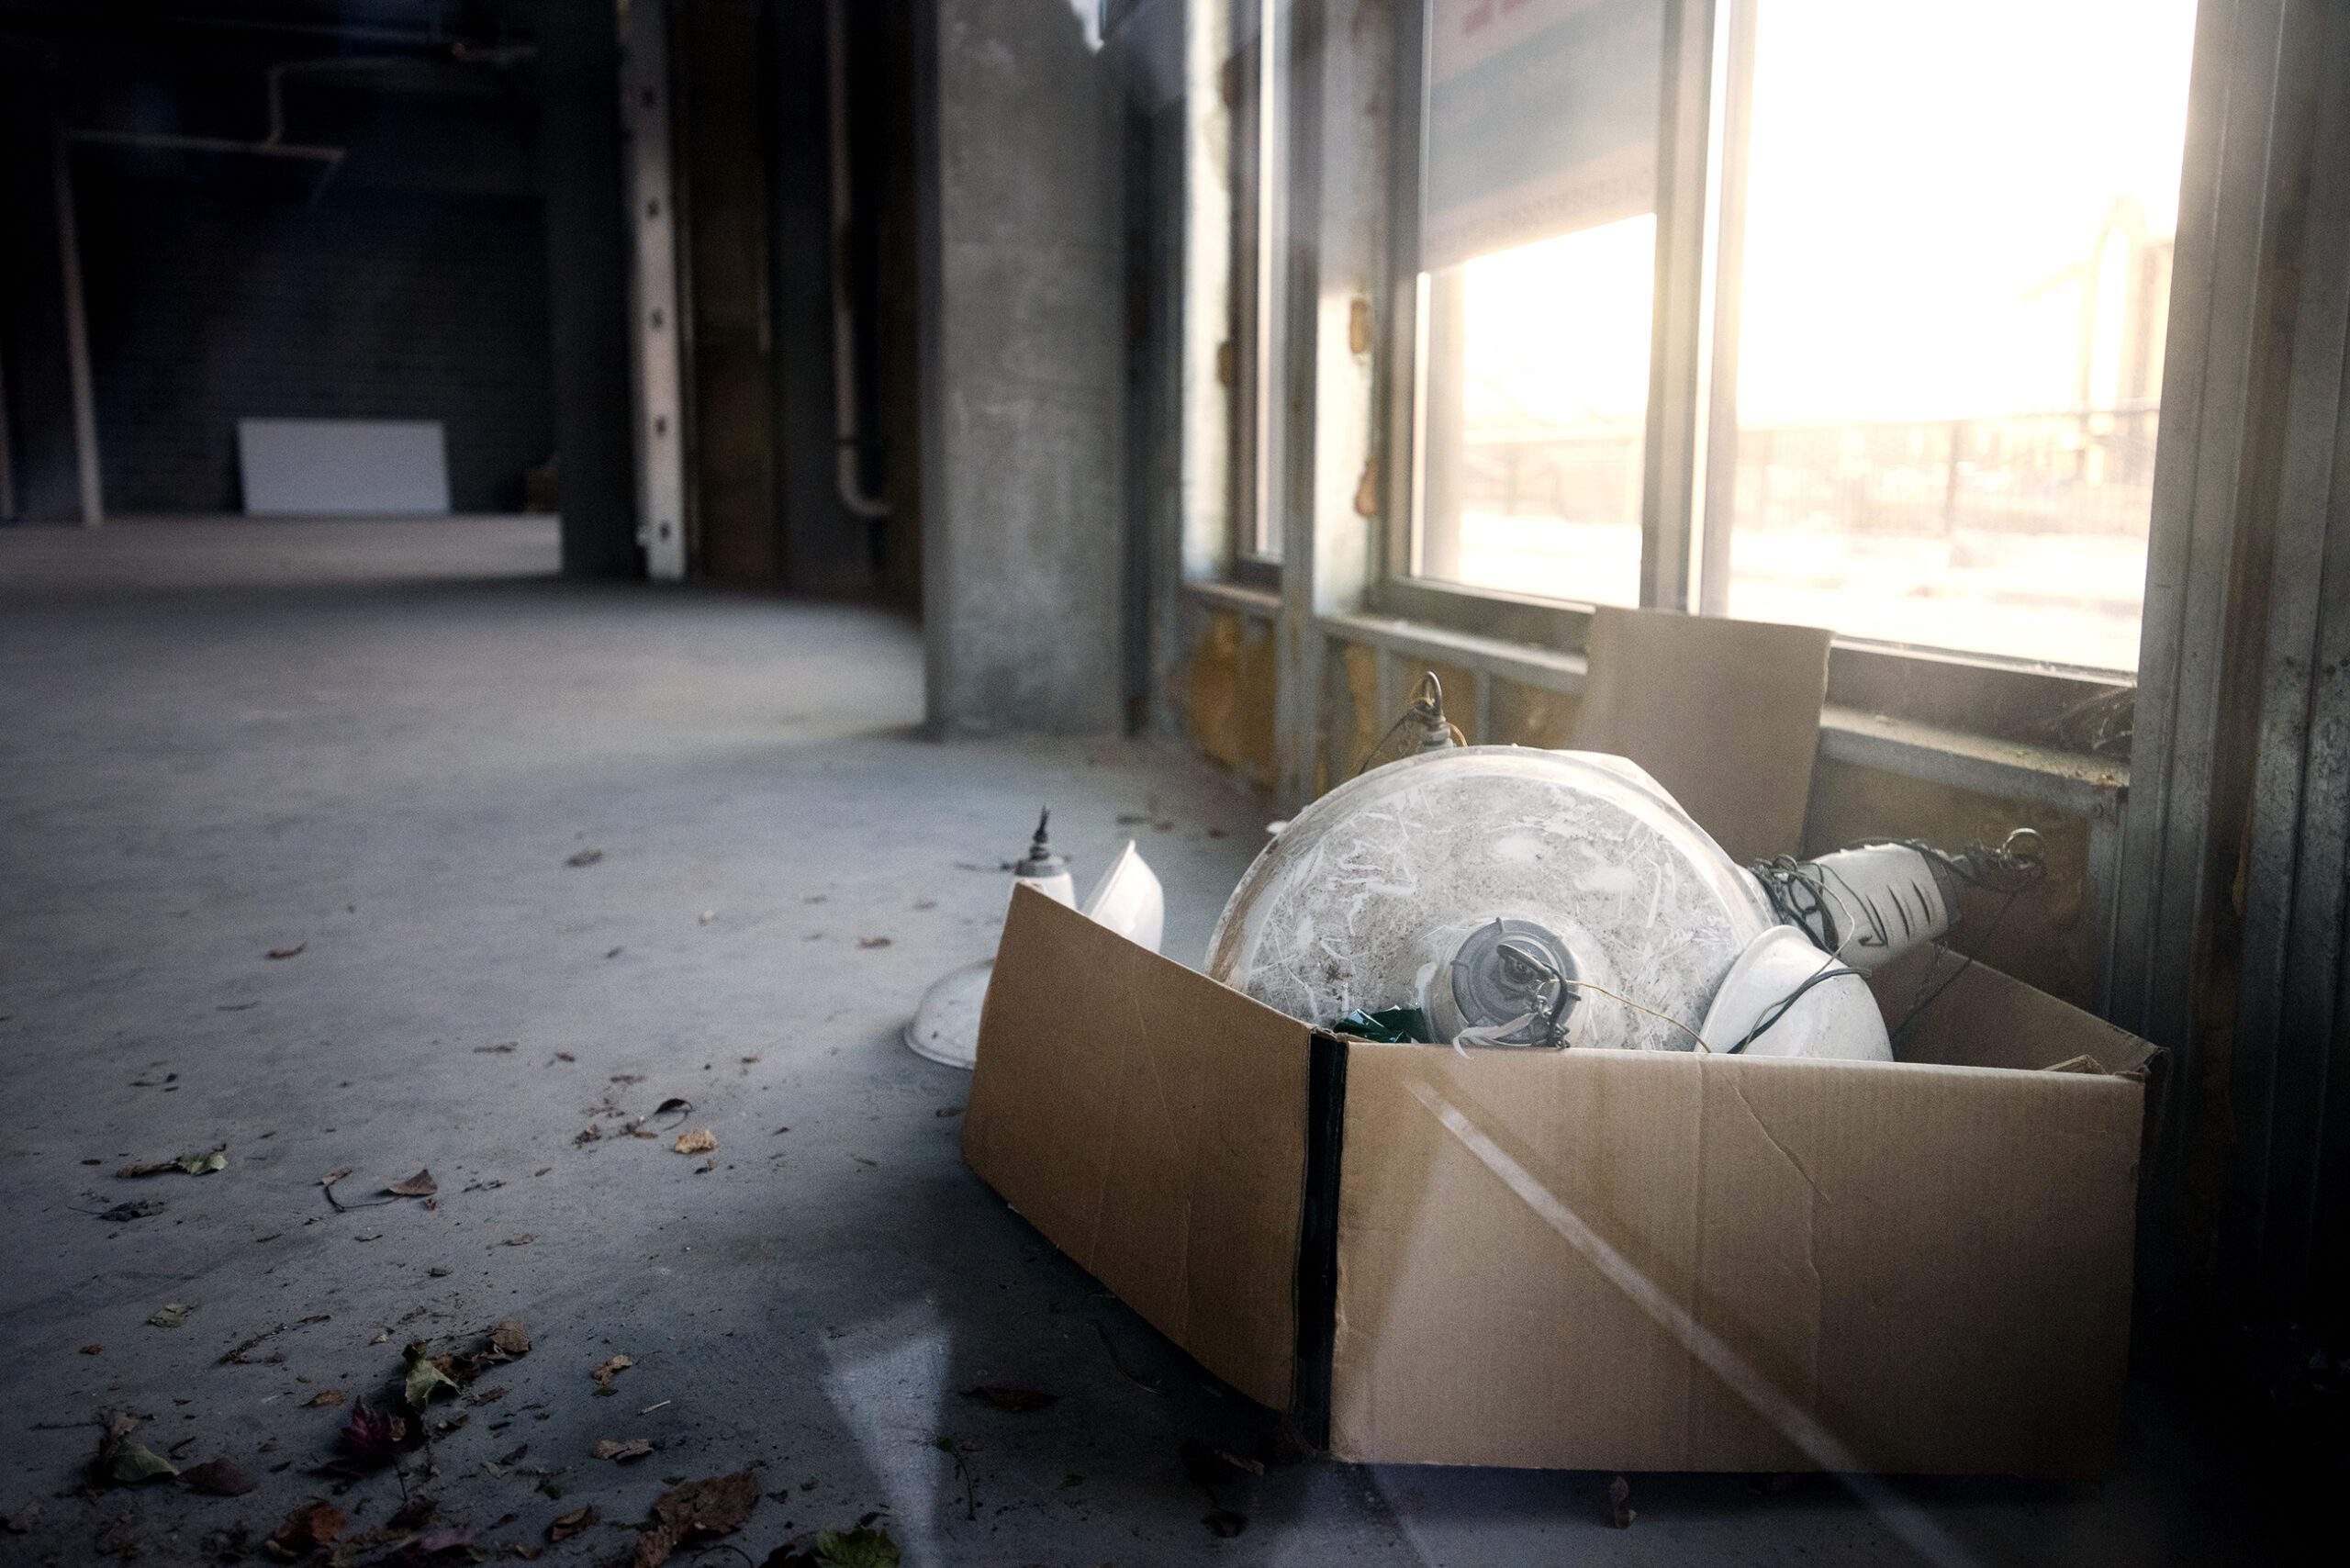 A cardboard box with various light fixtures inside sits on the concrete floor of a vacant room.